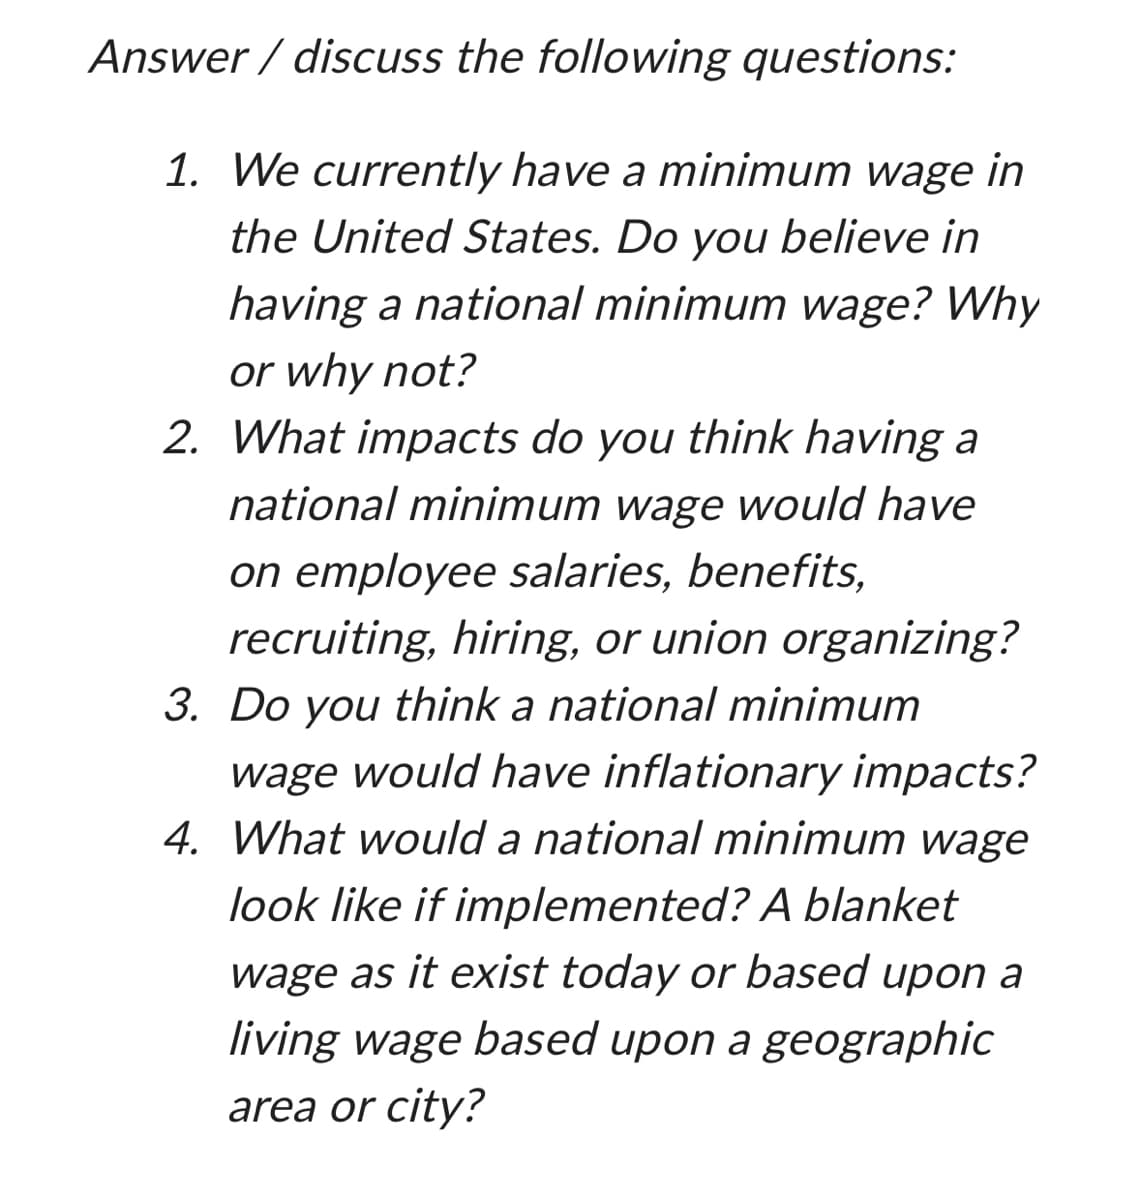 Answer/discuss the following questions:
1. We currently have a minimum wage in
the United States. Do you believe in
having a national minimum wage? Why
or why not?
2. What impacts do you think having a
national minimum wage would have
on employee salaries, benefits,
recruiting, hiring, or union organizing?
3. Do you think a national minimum
wage would have inflationary impacts?
4. What would a national minimum wage
look like if implemented? A blanket
wage as it exist today or based upon a
living wage based upon a geographic
area or city?